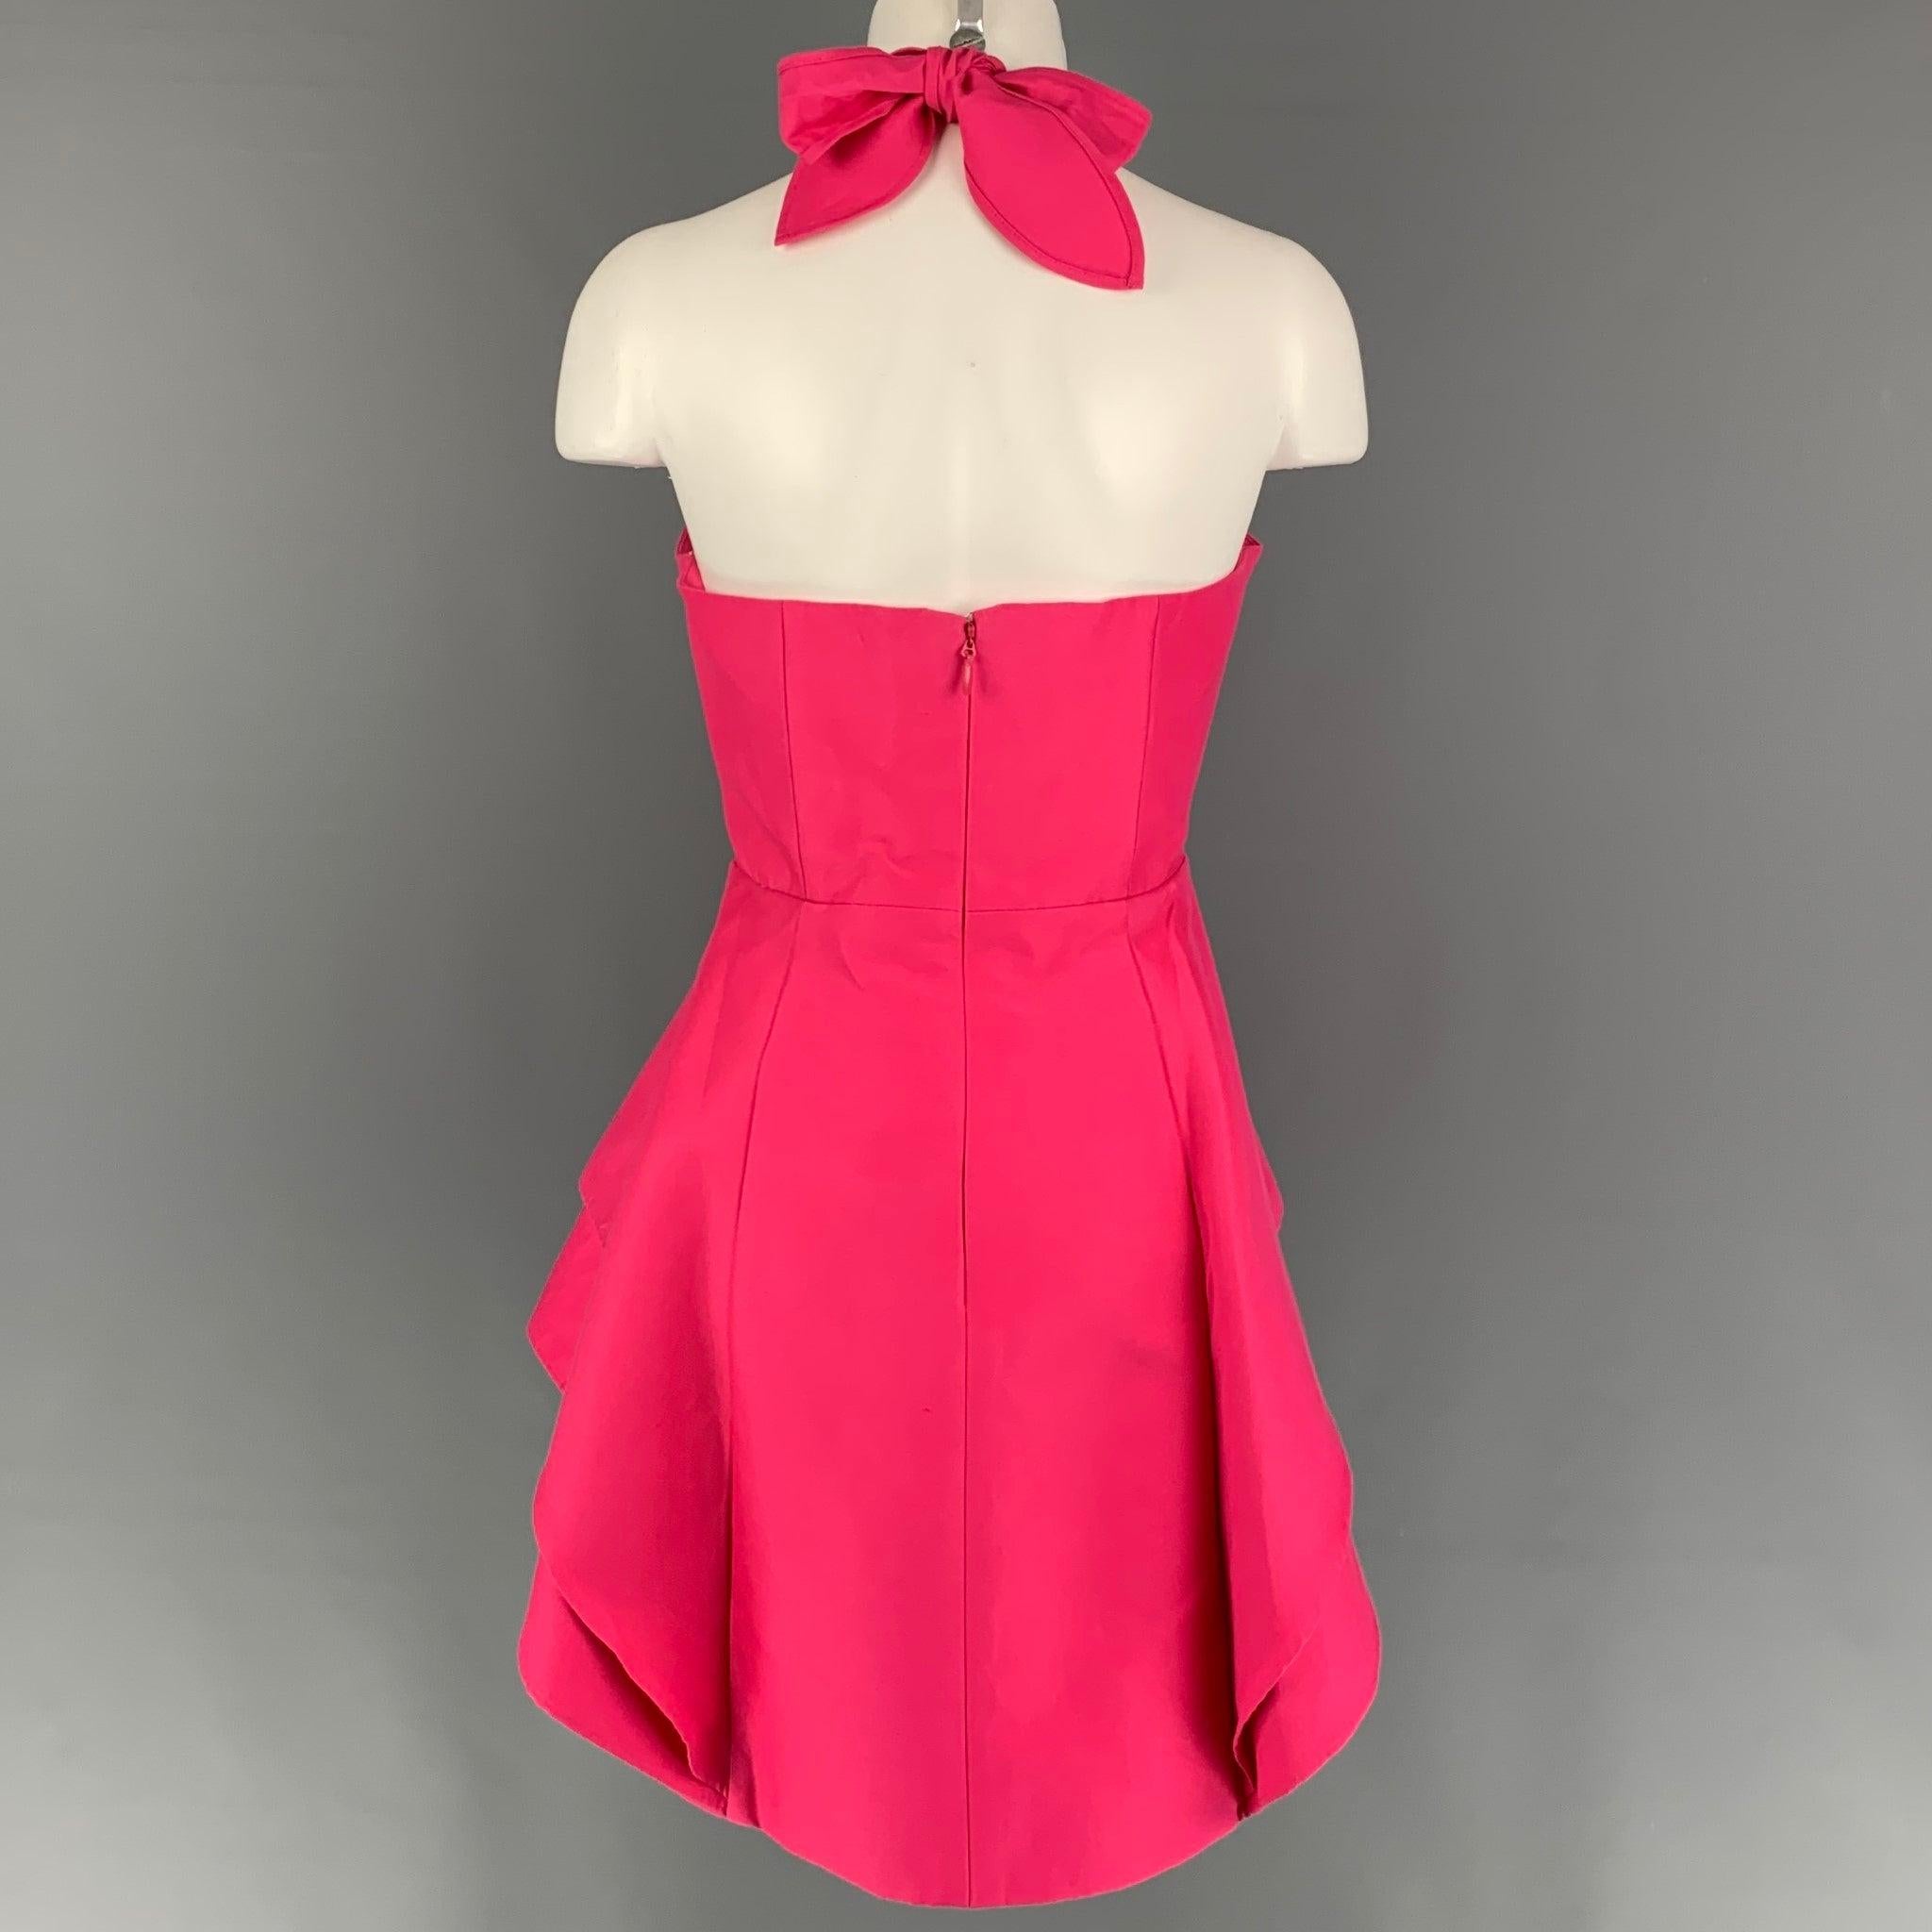 HALSTON HERITAGE Size 10 Pink Cotton Silk Sleeveless Dress In Good Condition For Sale In San Francisco, CA